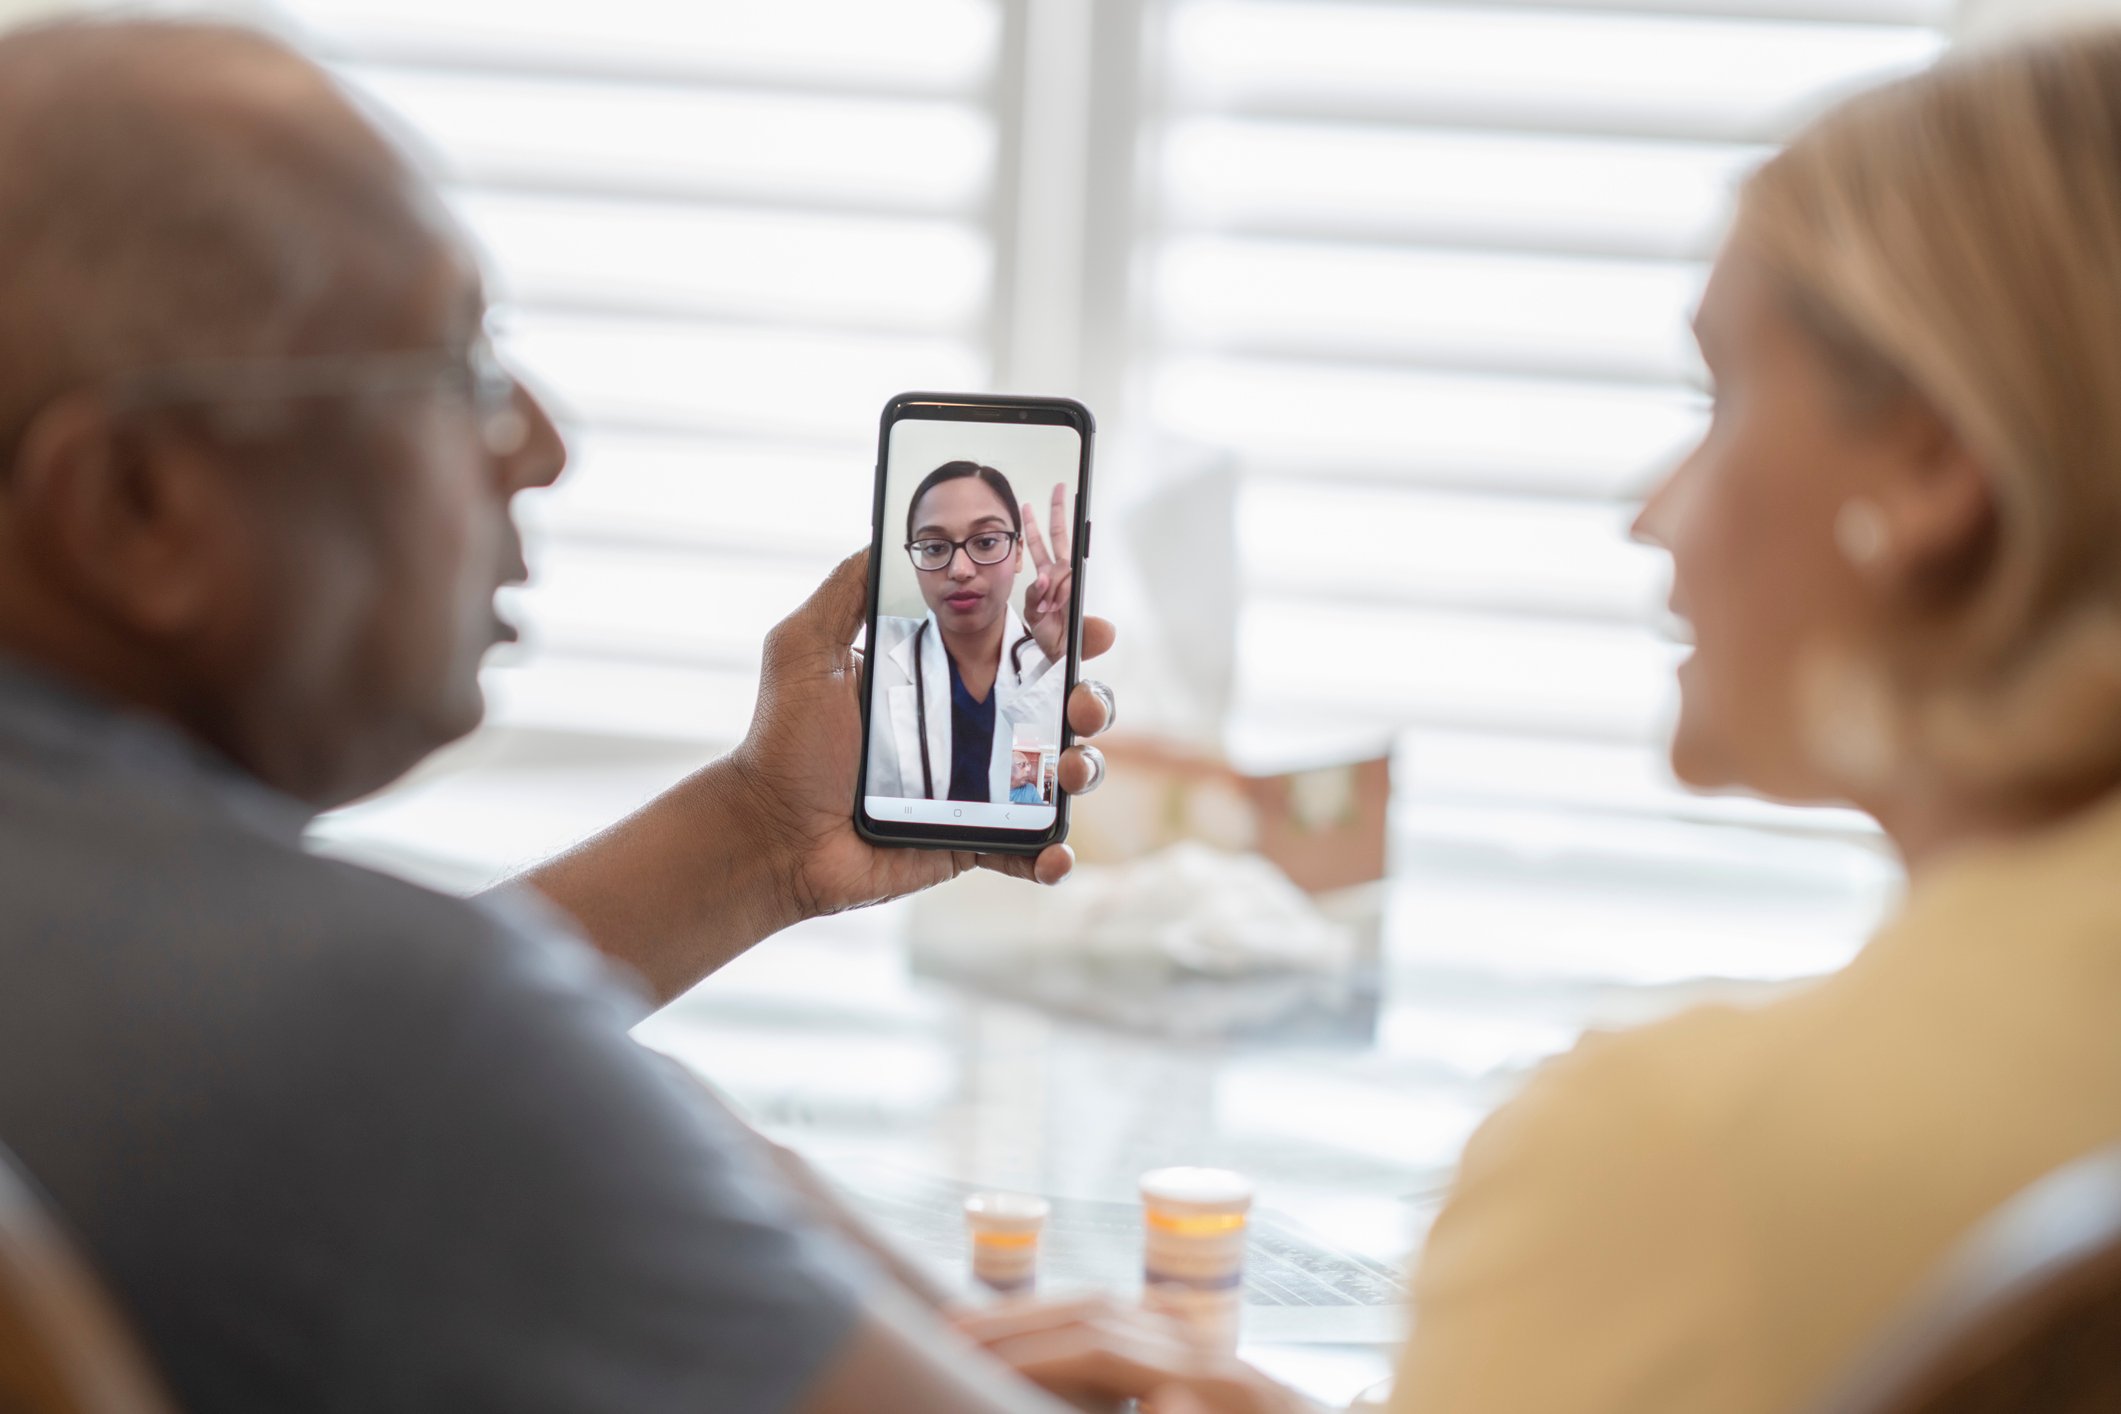 Leaning Into Telemedicine: 5 Ways To Enable More Effective Virtual Visits